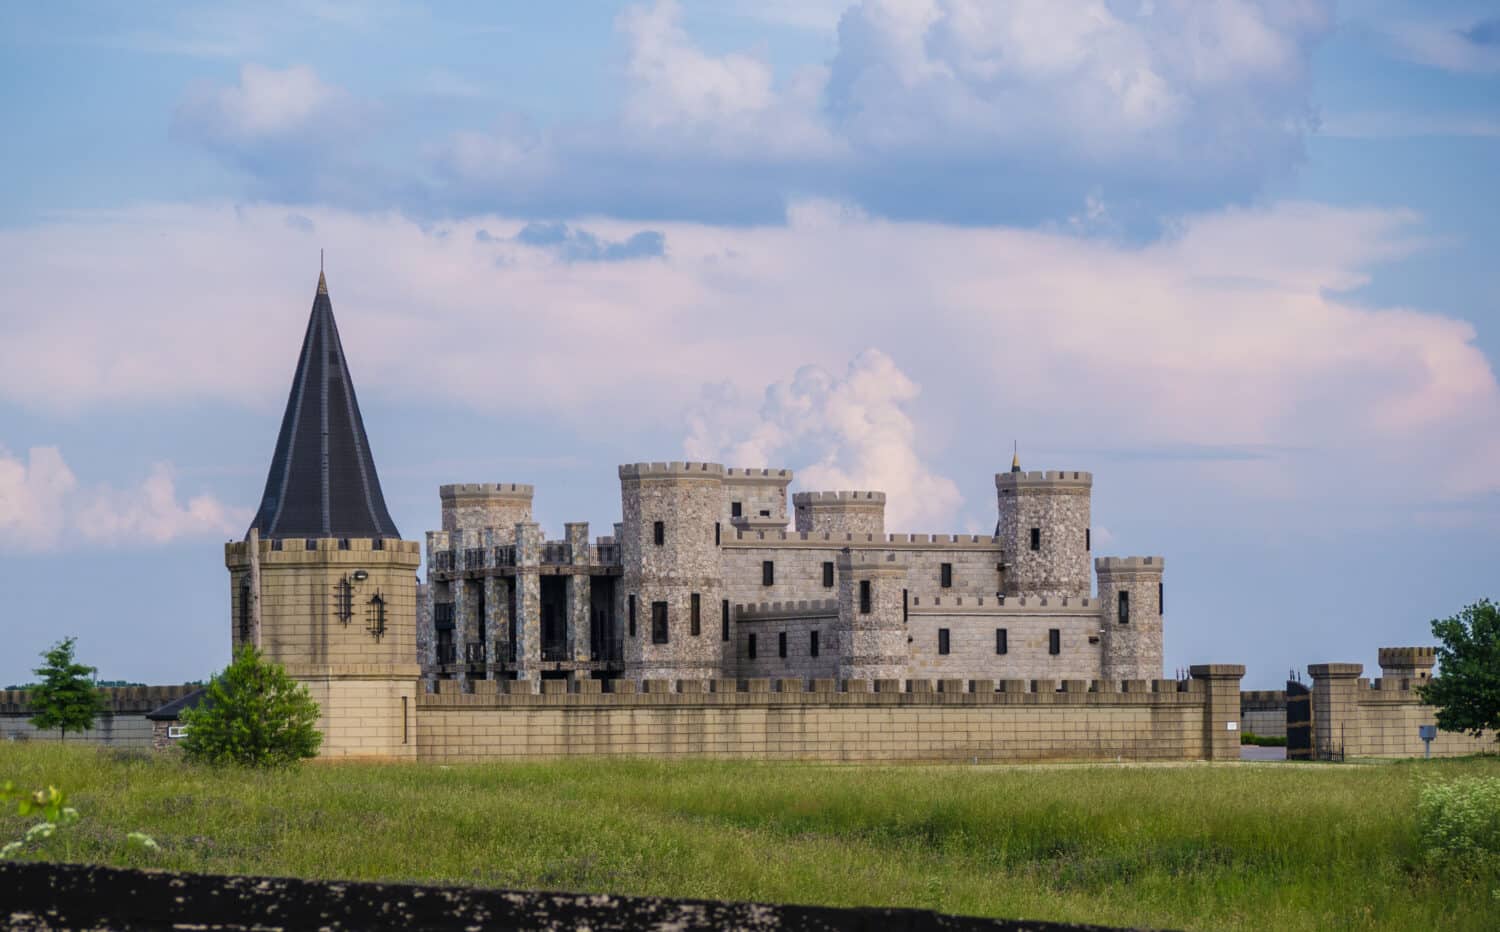 Castle Post. One of the most magnificent castles found in Kentucky.